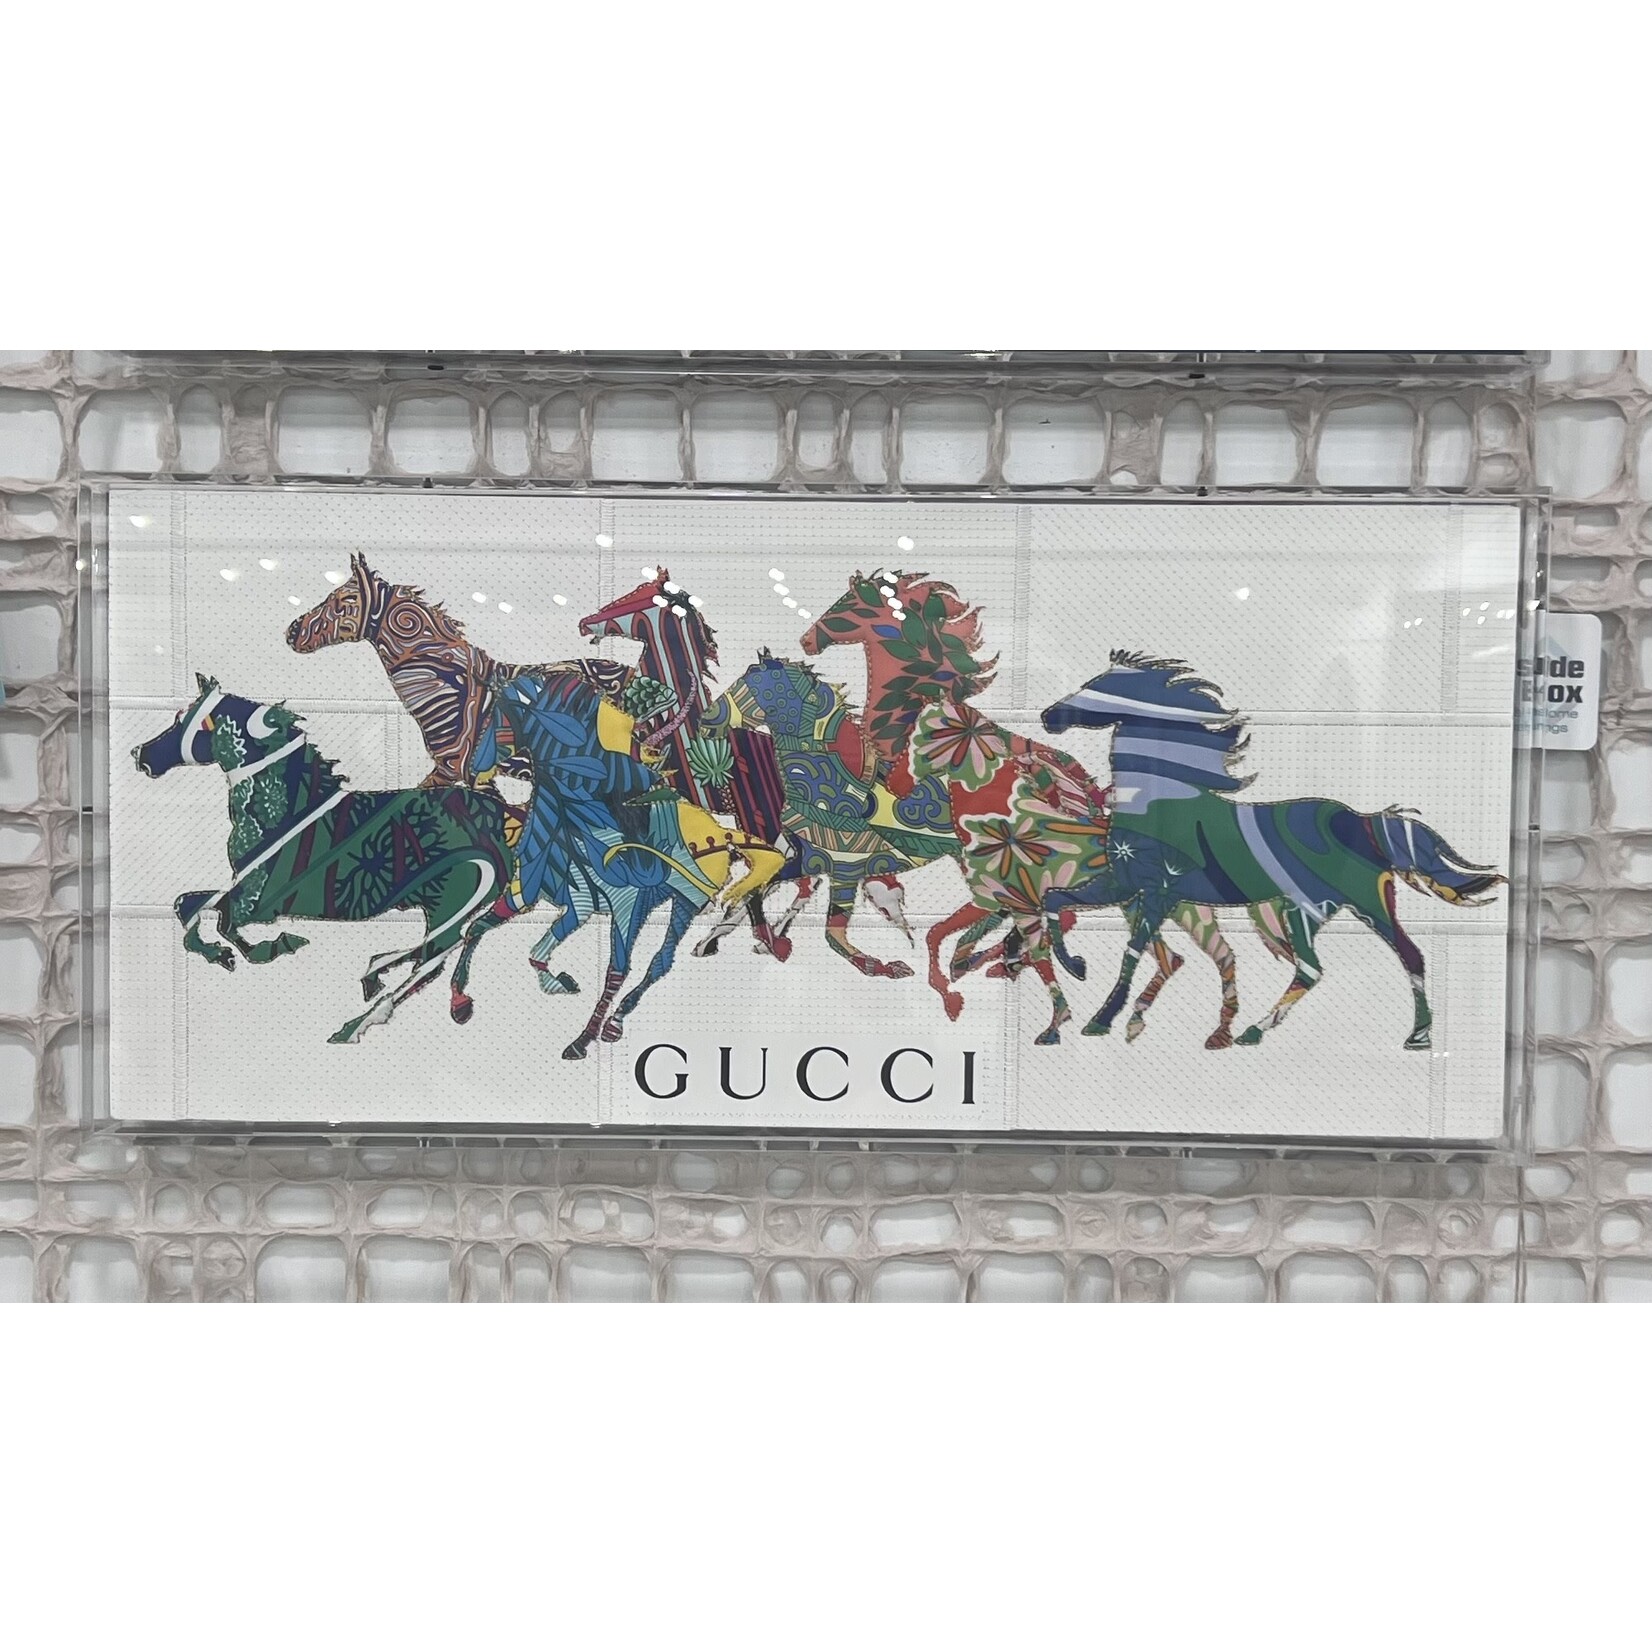 Outside The Box 26 x 12 Stephen Wilson "Parade" GUCCI  Custom Framed In Acrylic